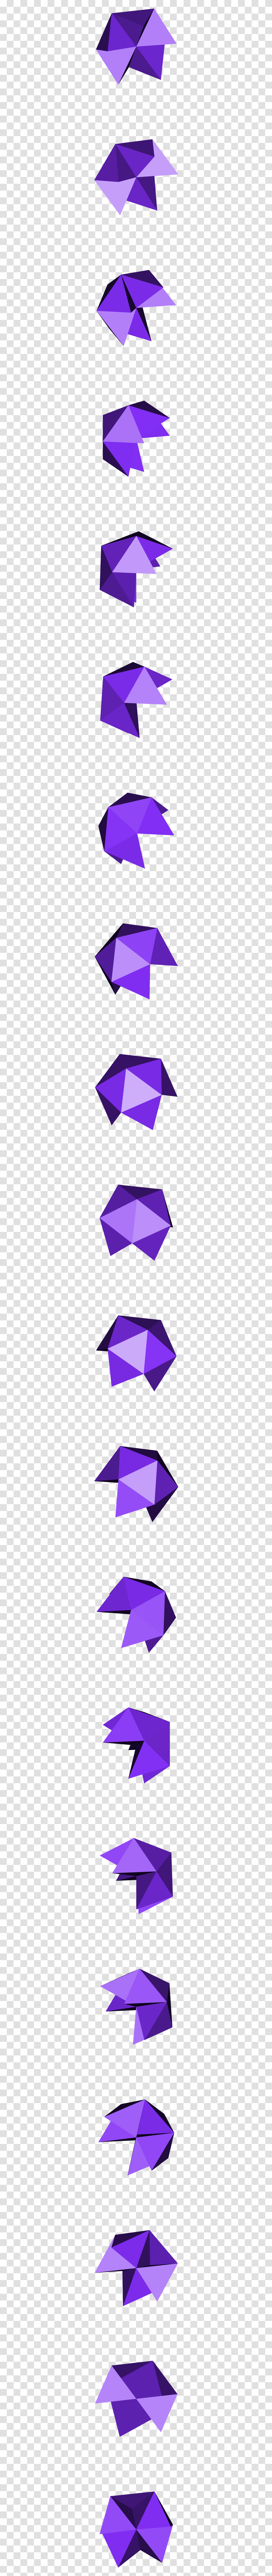 Triangle, Purple, Recycling Symbol Transparent Png